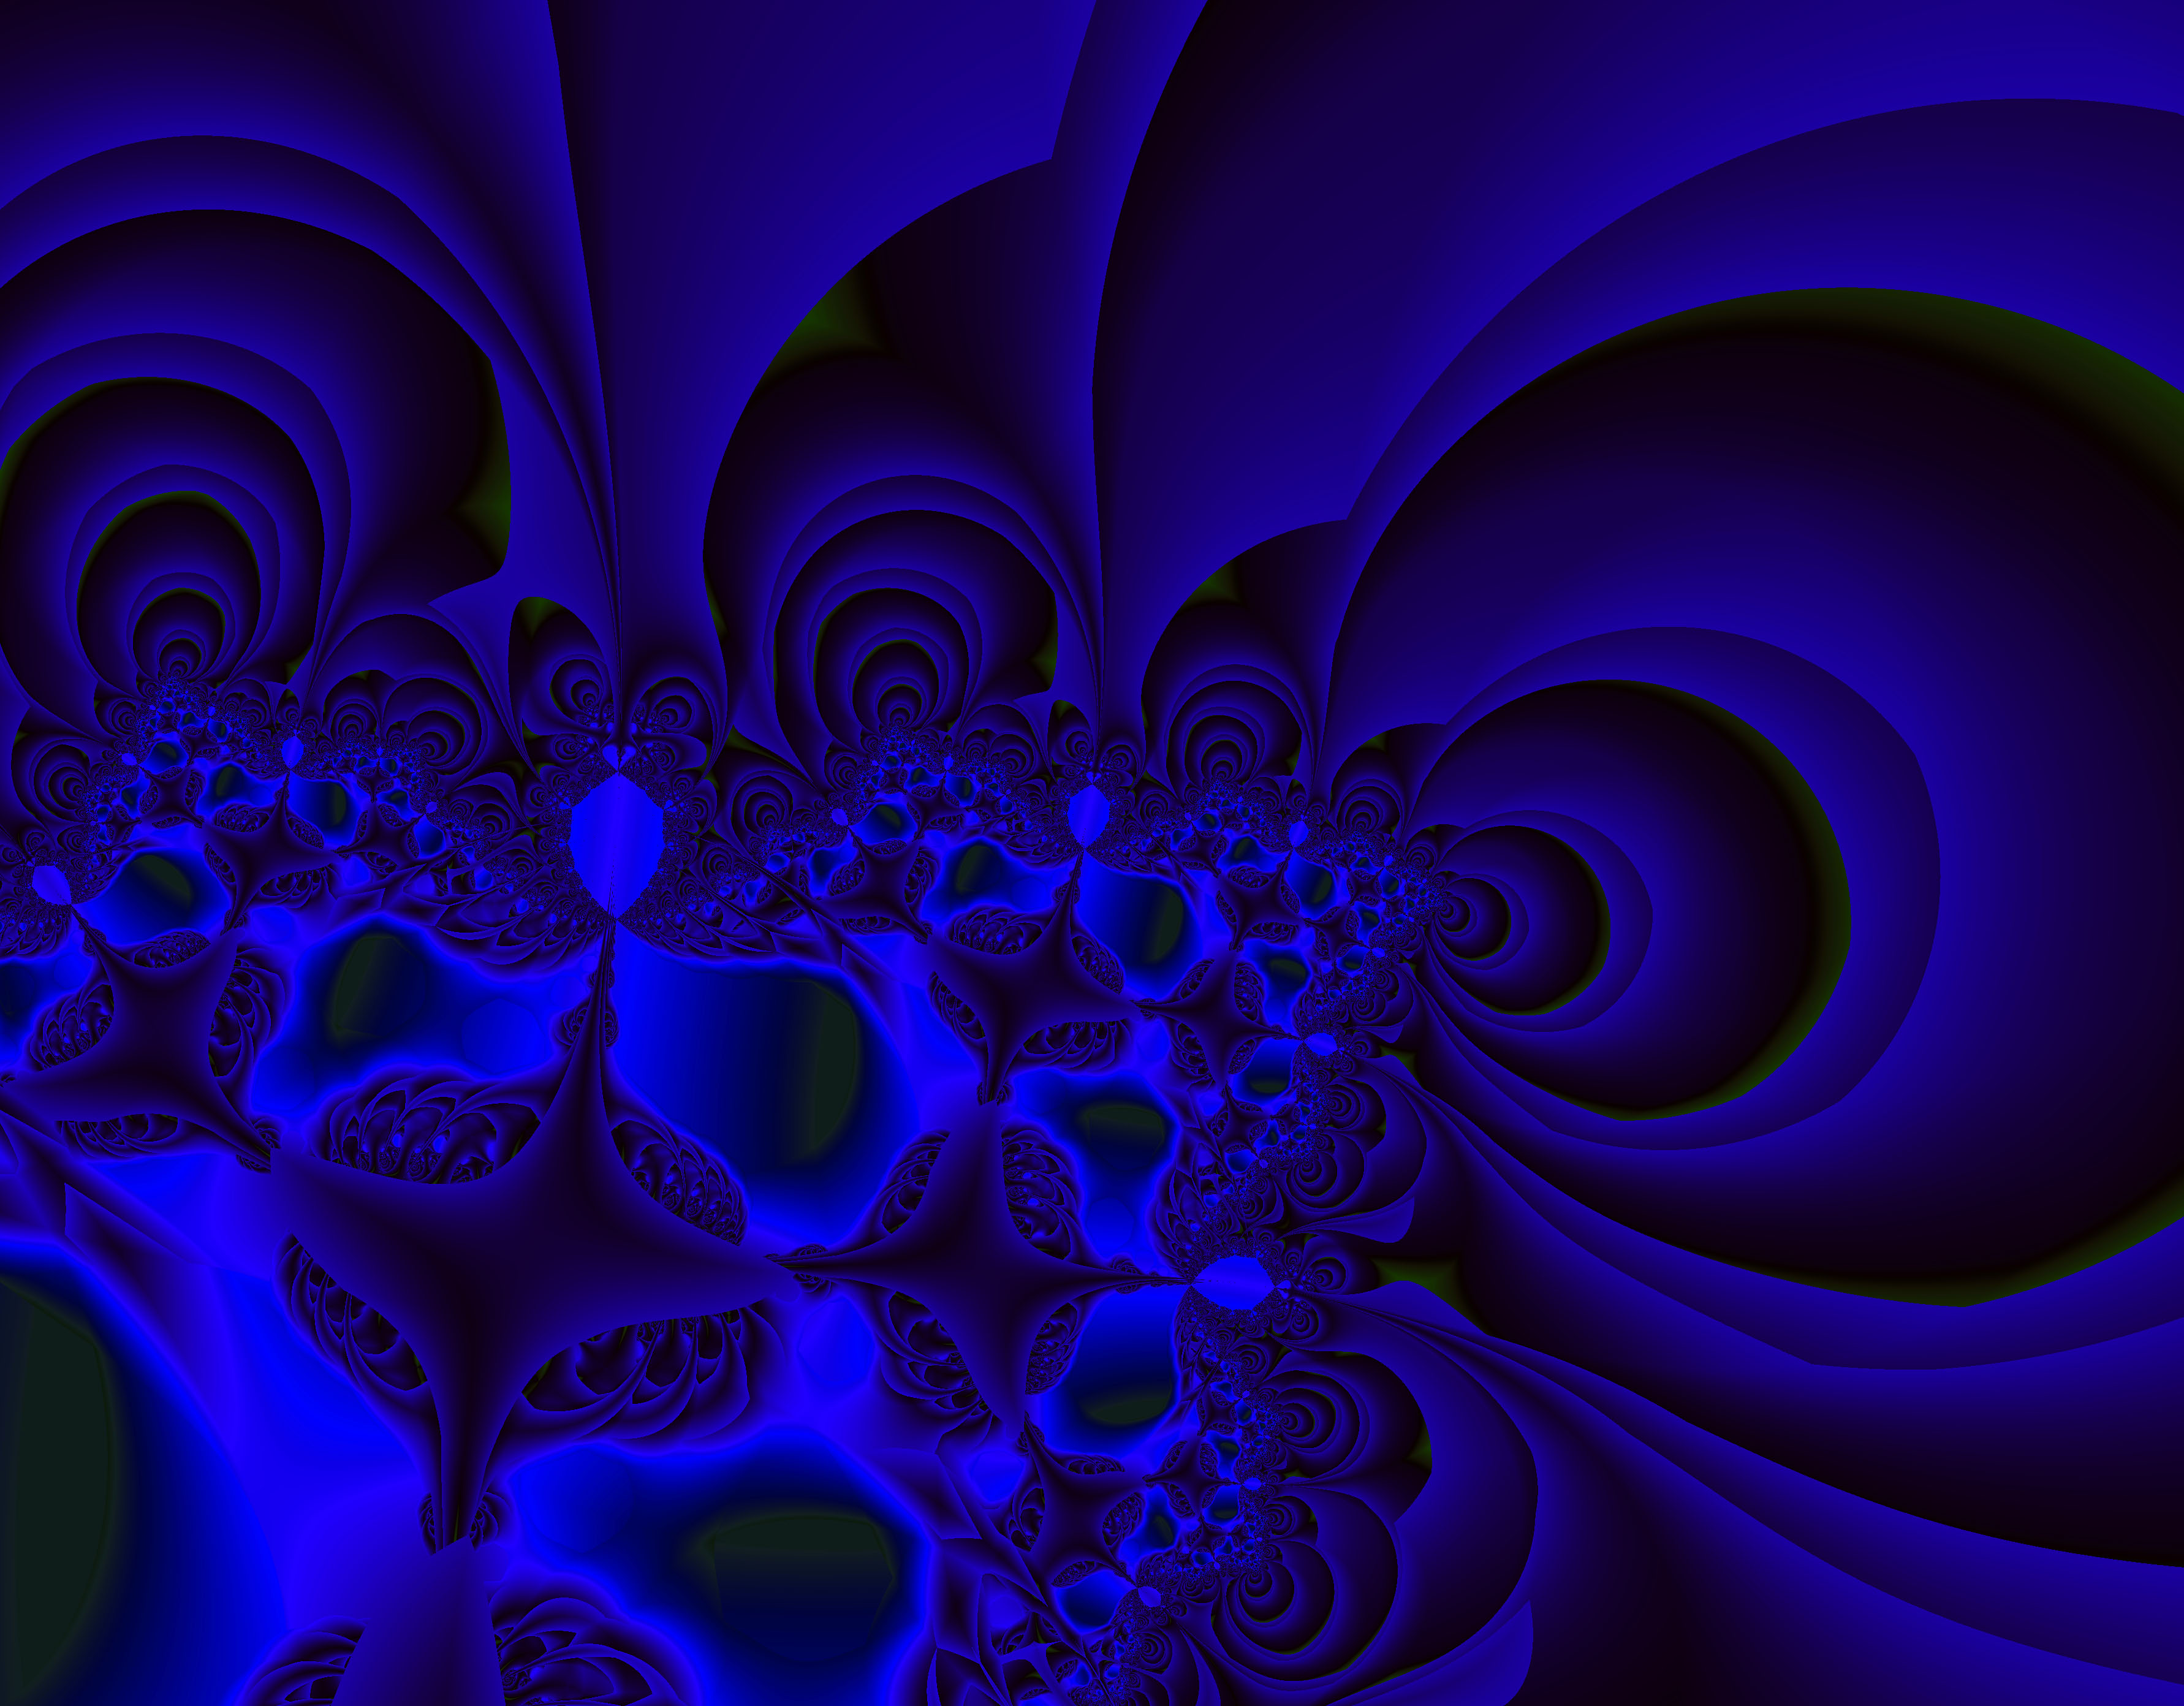 Abstract Royal Blue Background Hd - 3564x2784 Wallpaper 